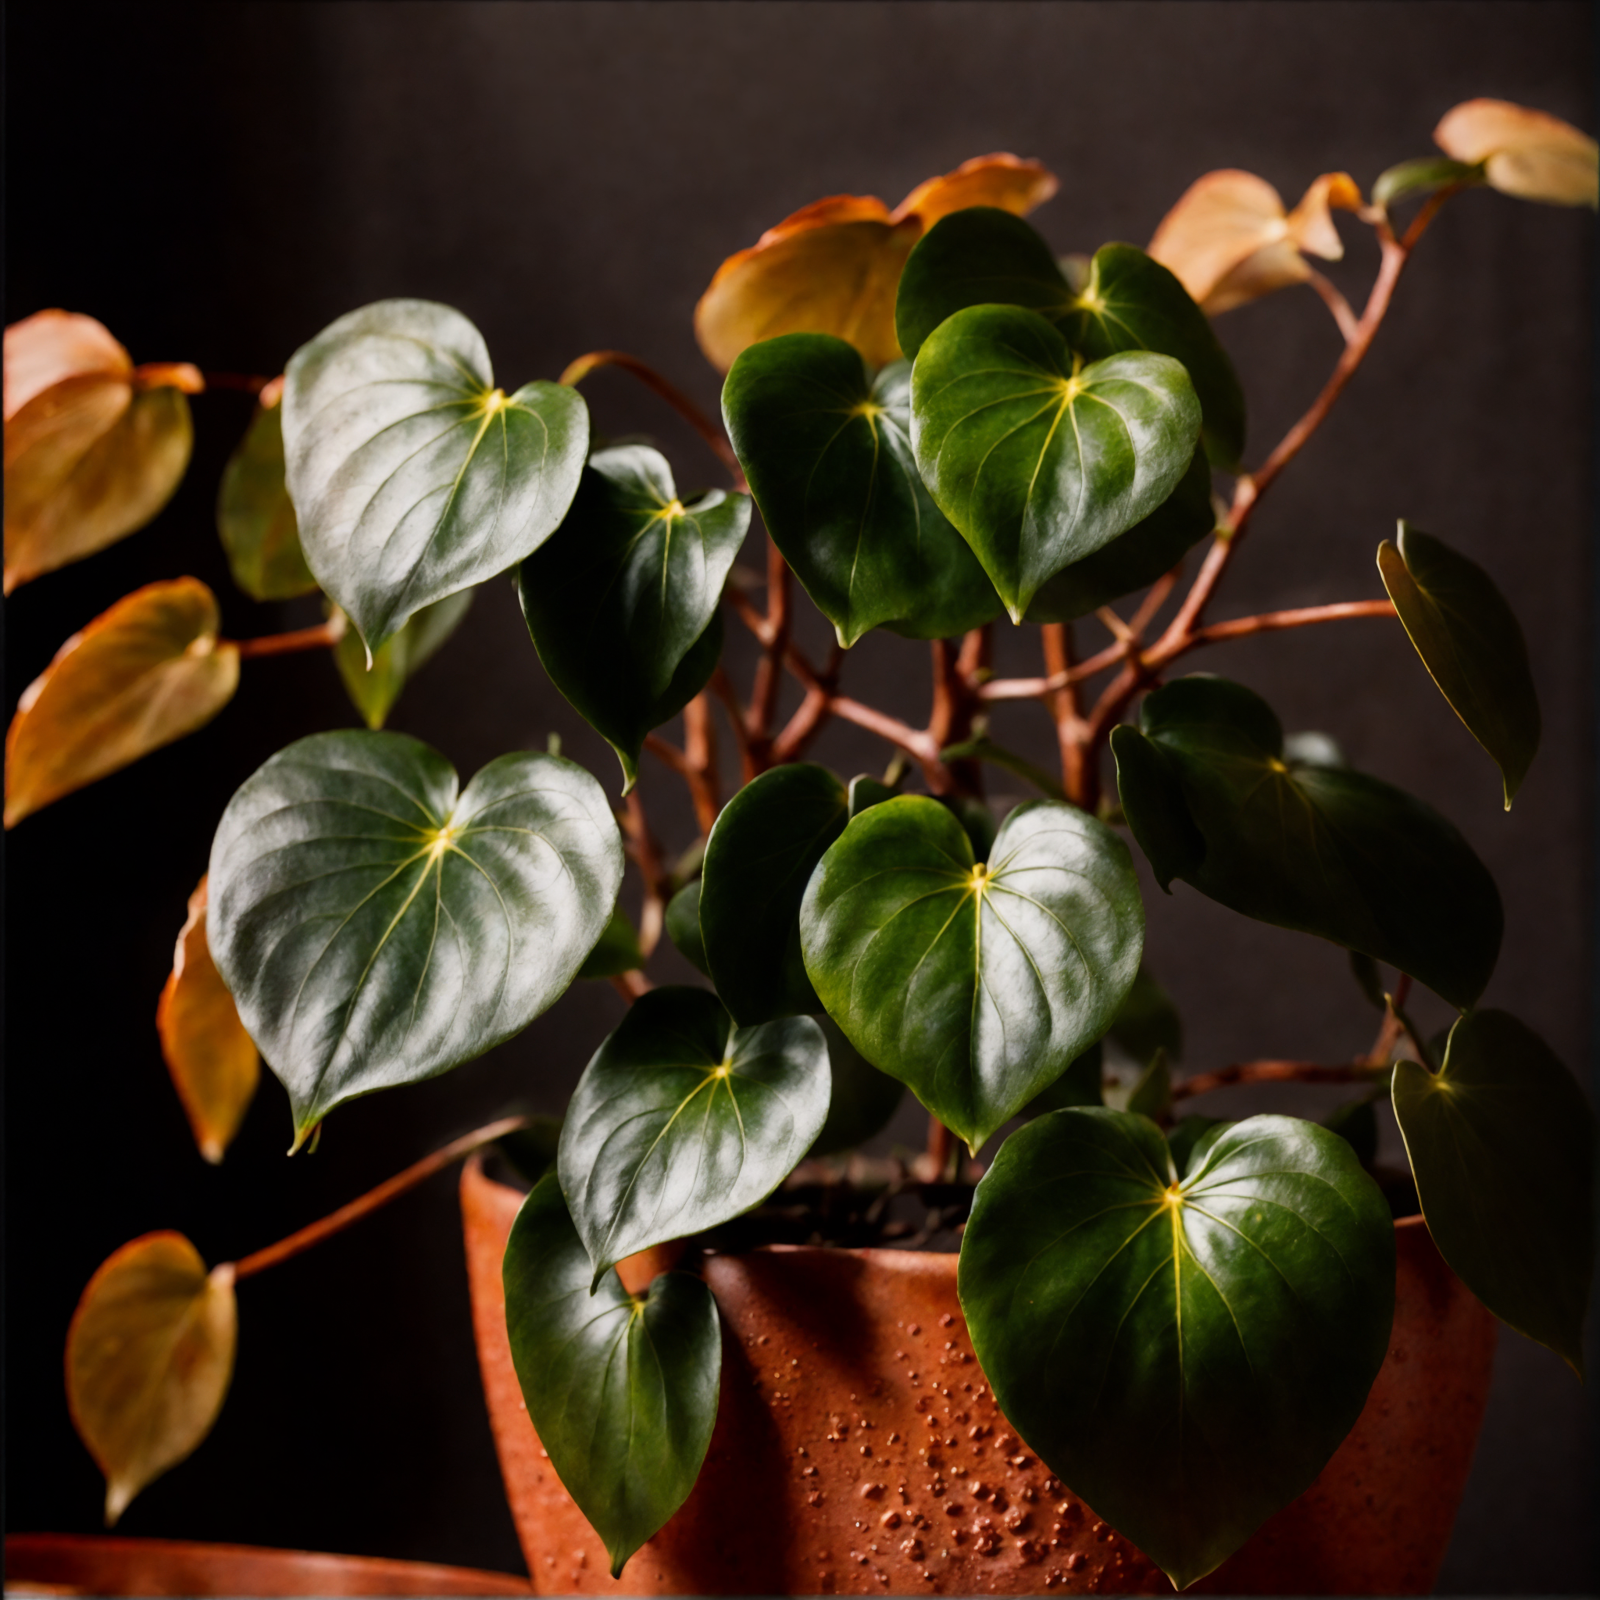 Peperomia polybotrya with heart-shaped leaves in a planter, clear lighting, against a dark background.